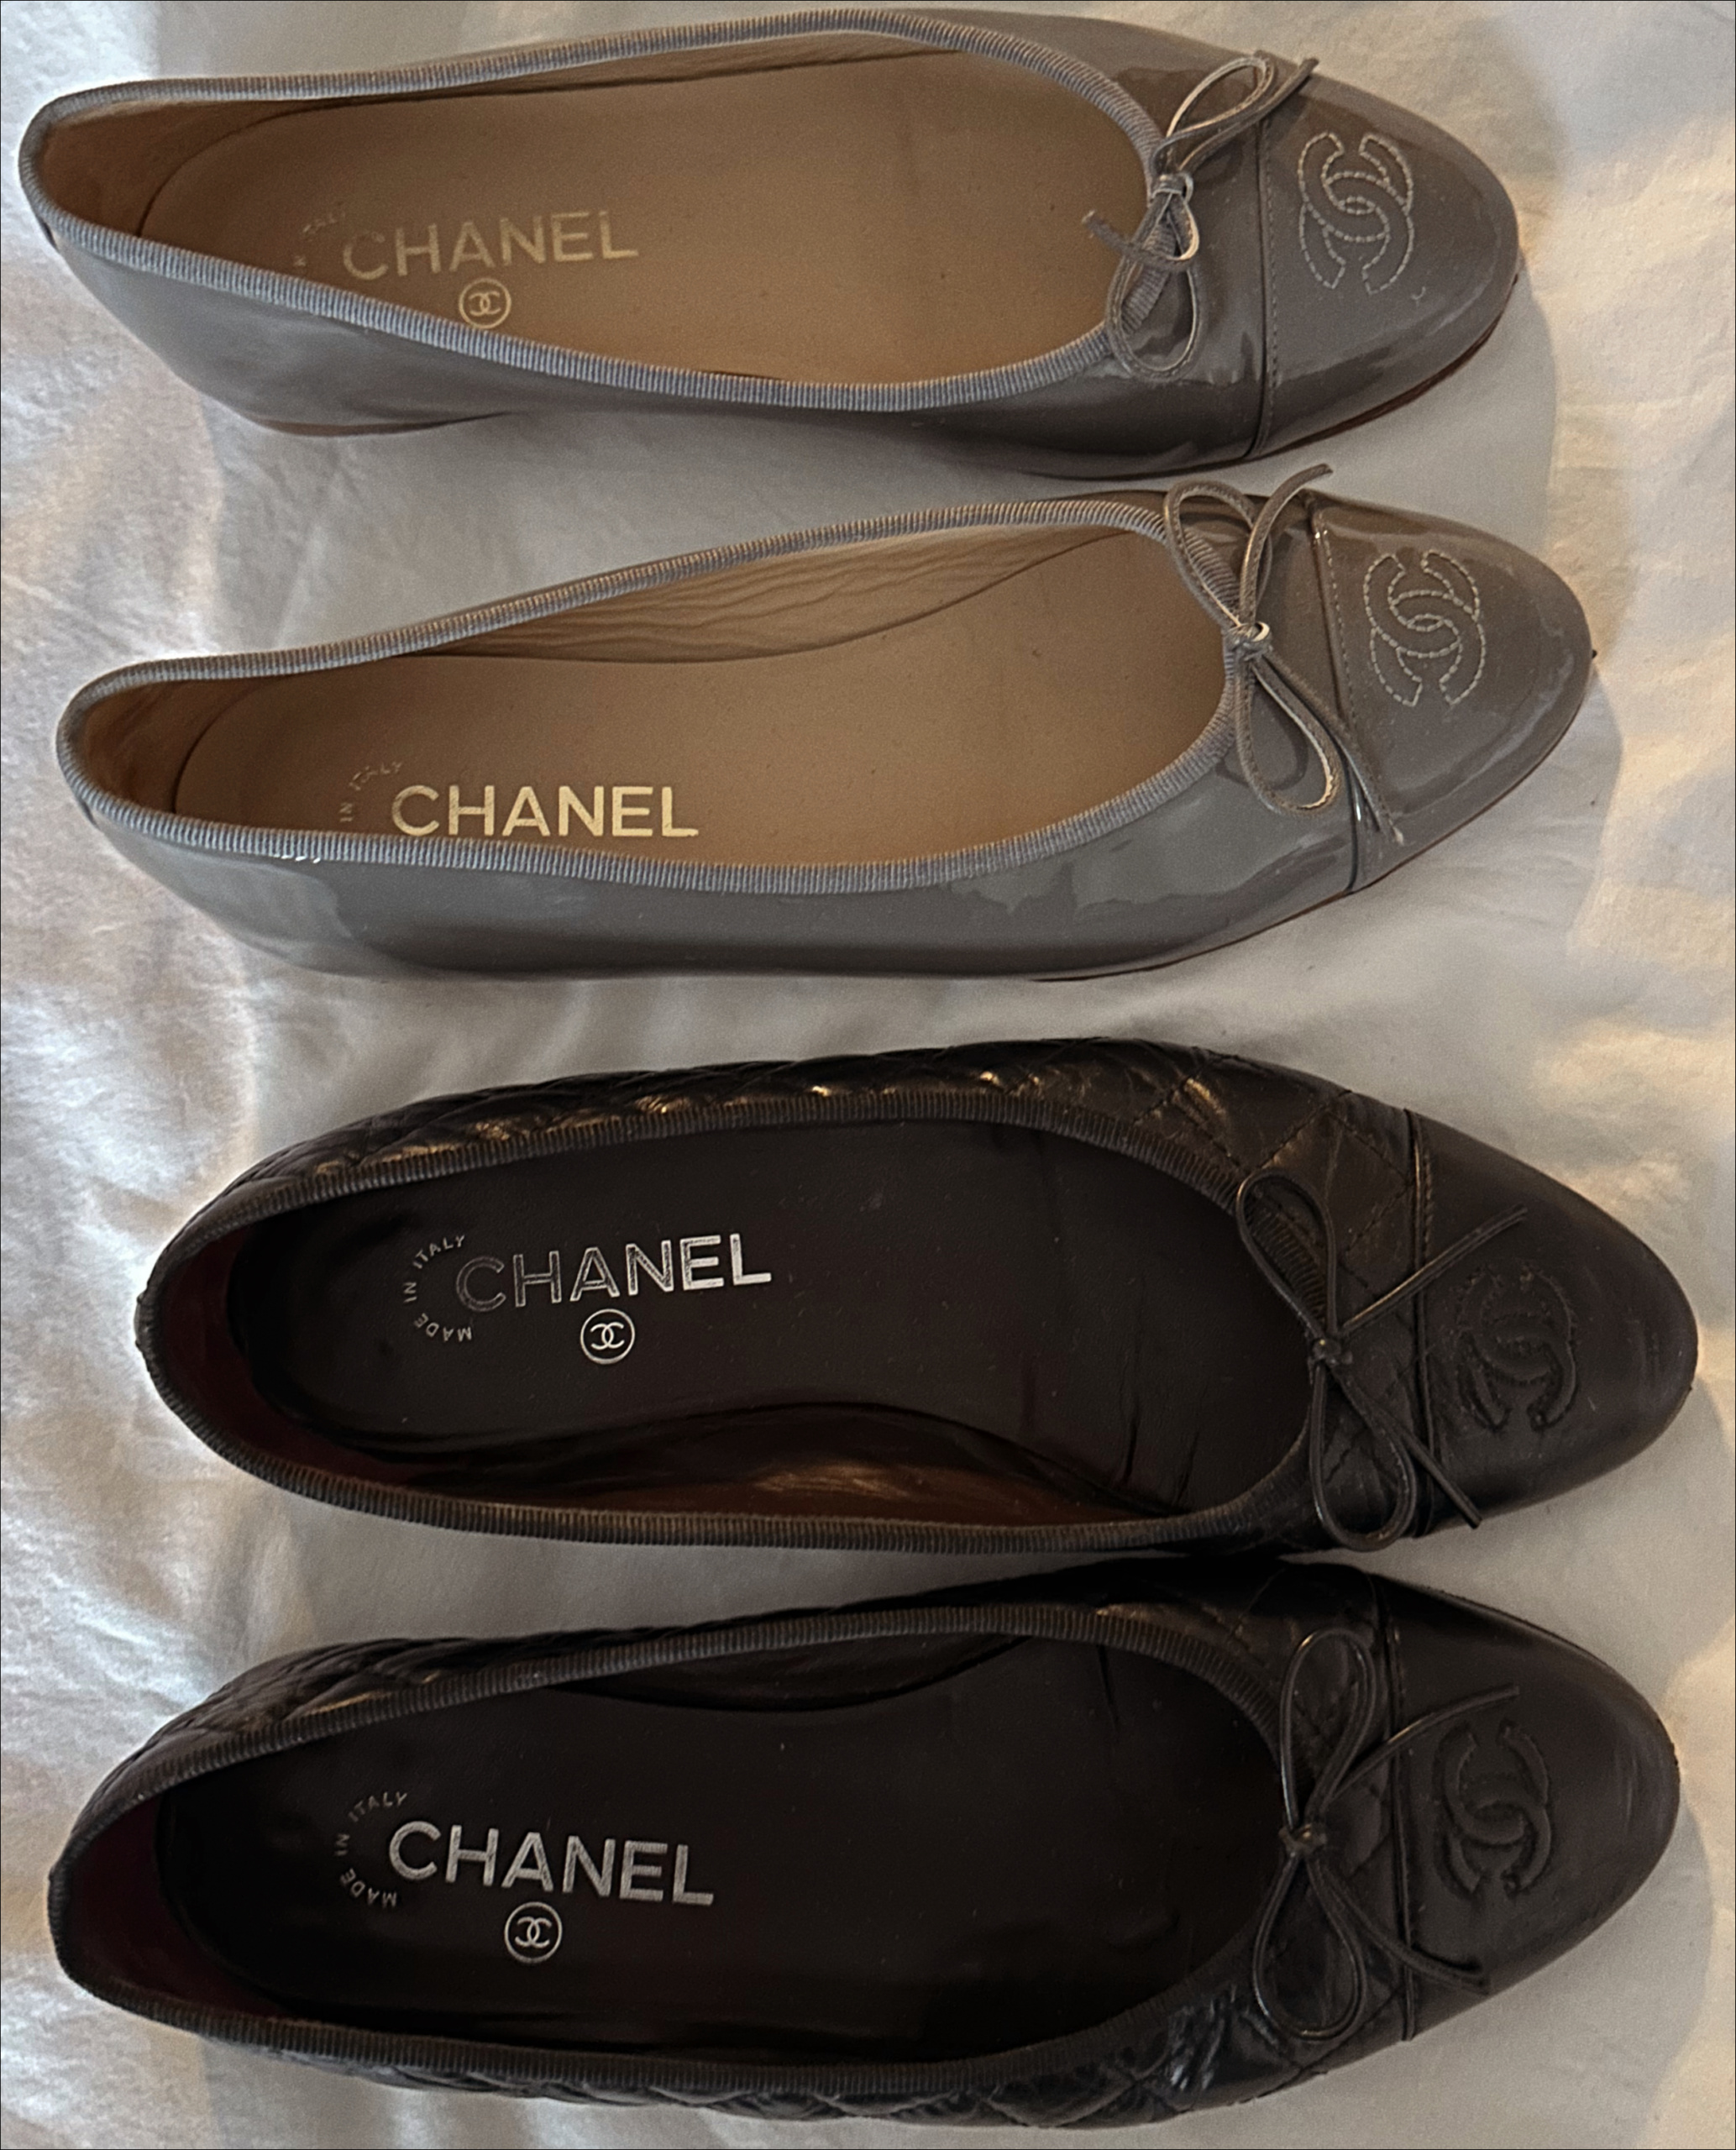 Chanel Flats Sizing & Buying Guide Brooklyn Blonde